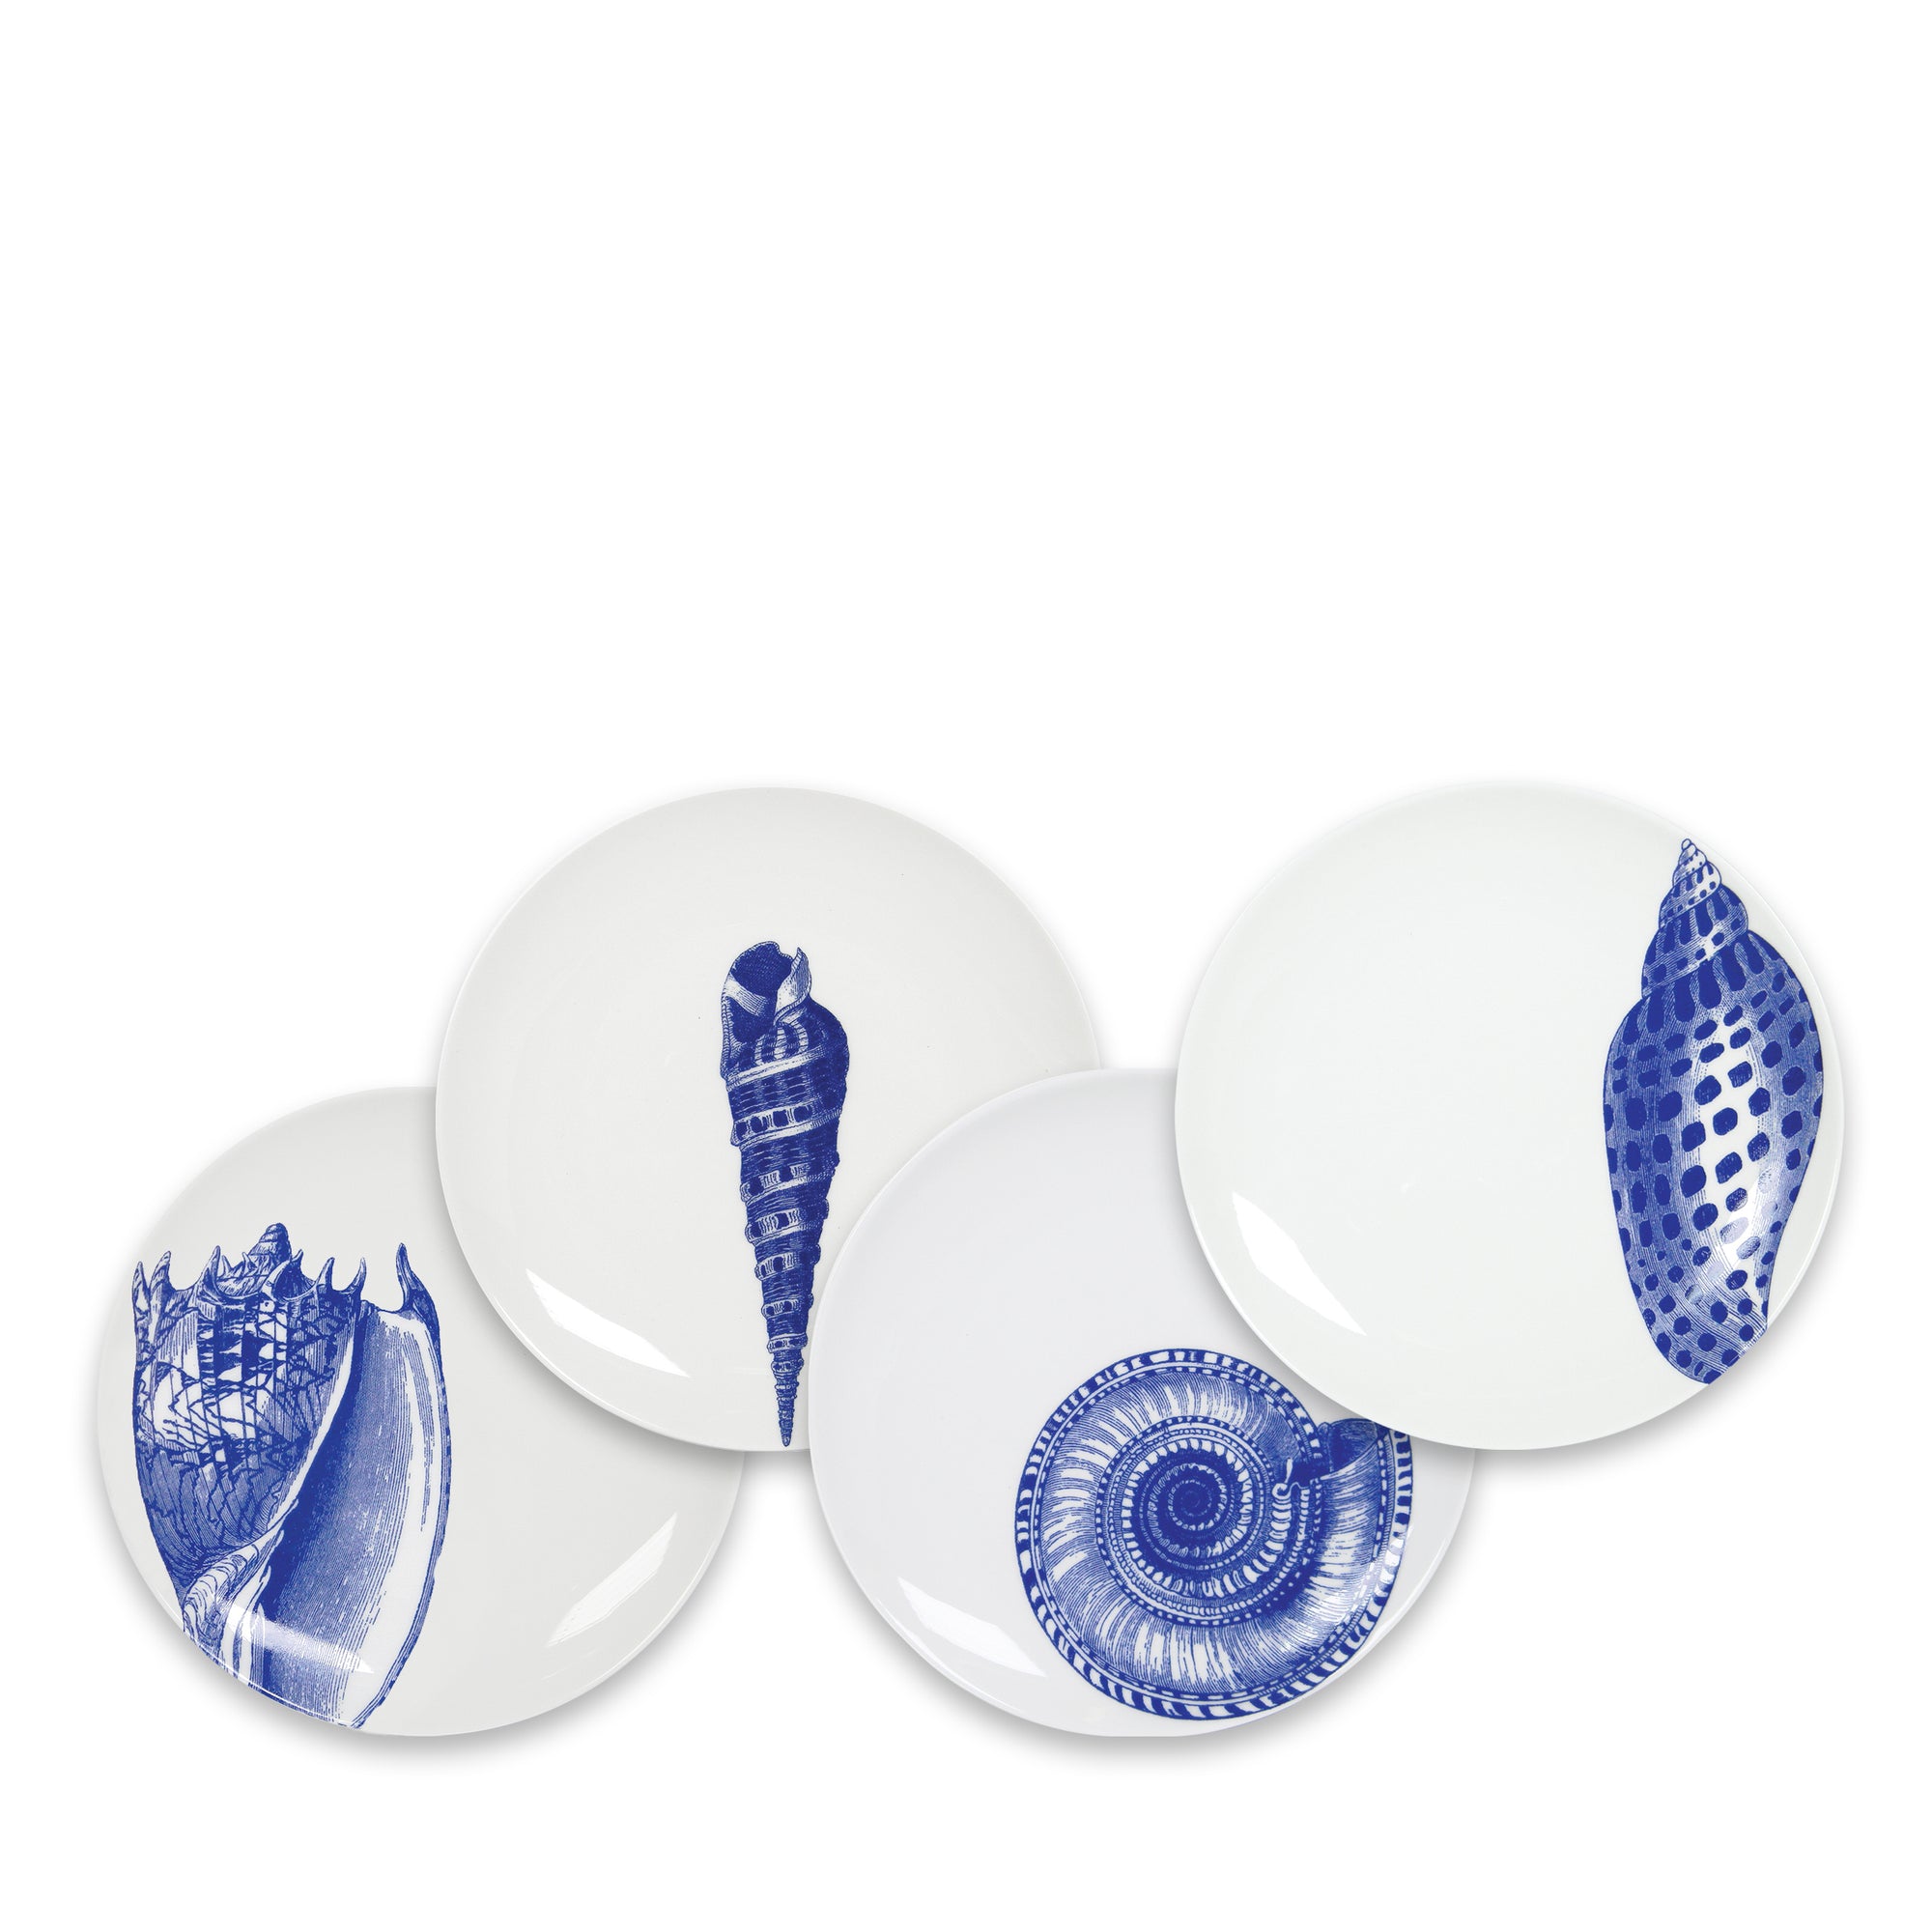 Four heirloom-quality Shells Small Plates by Caskata Artisanal Home featuring blue sea shell designs in different styles are arranged in an overlapping pattern on a white background, showcasing their place in a refined beach collection.